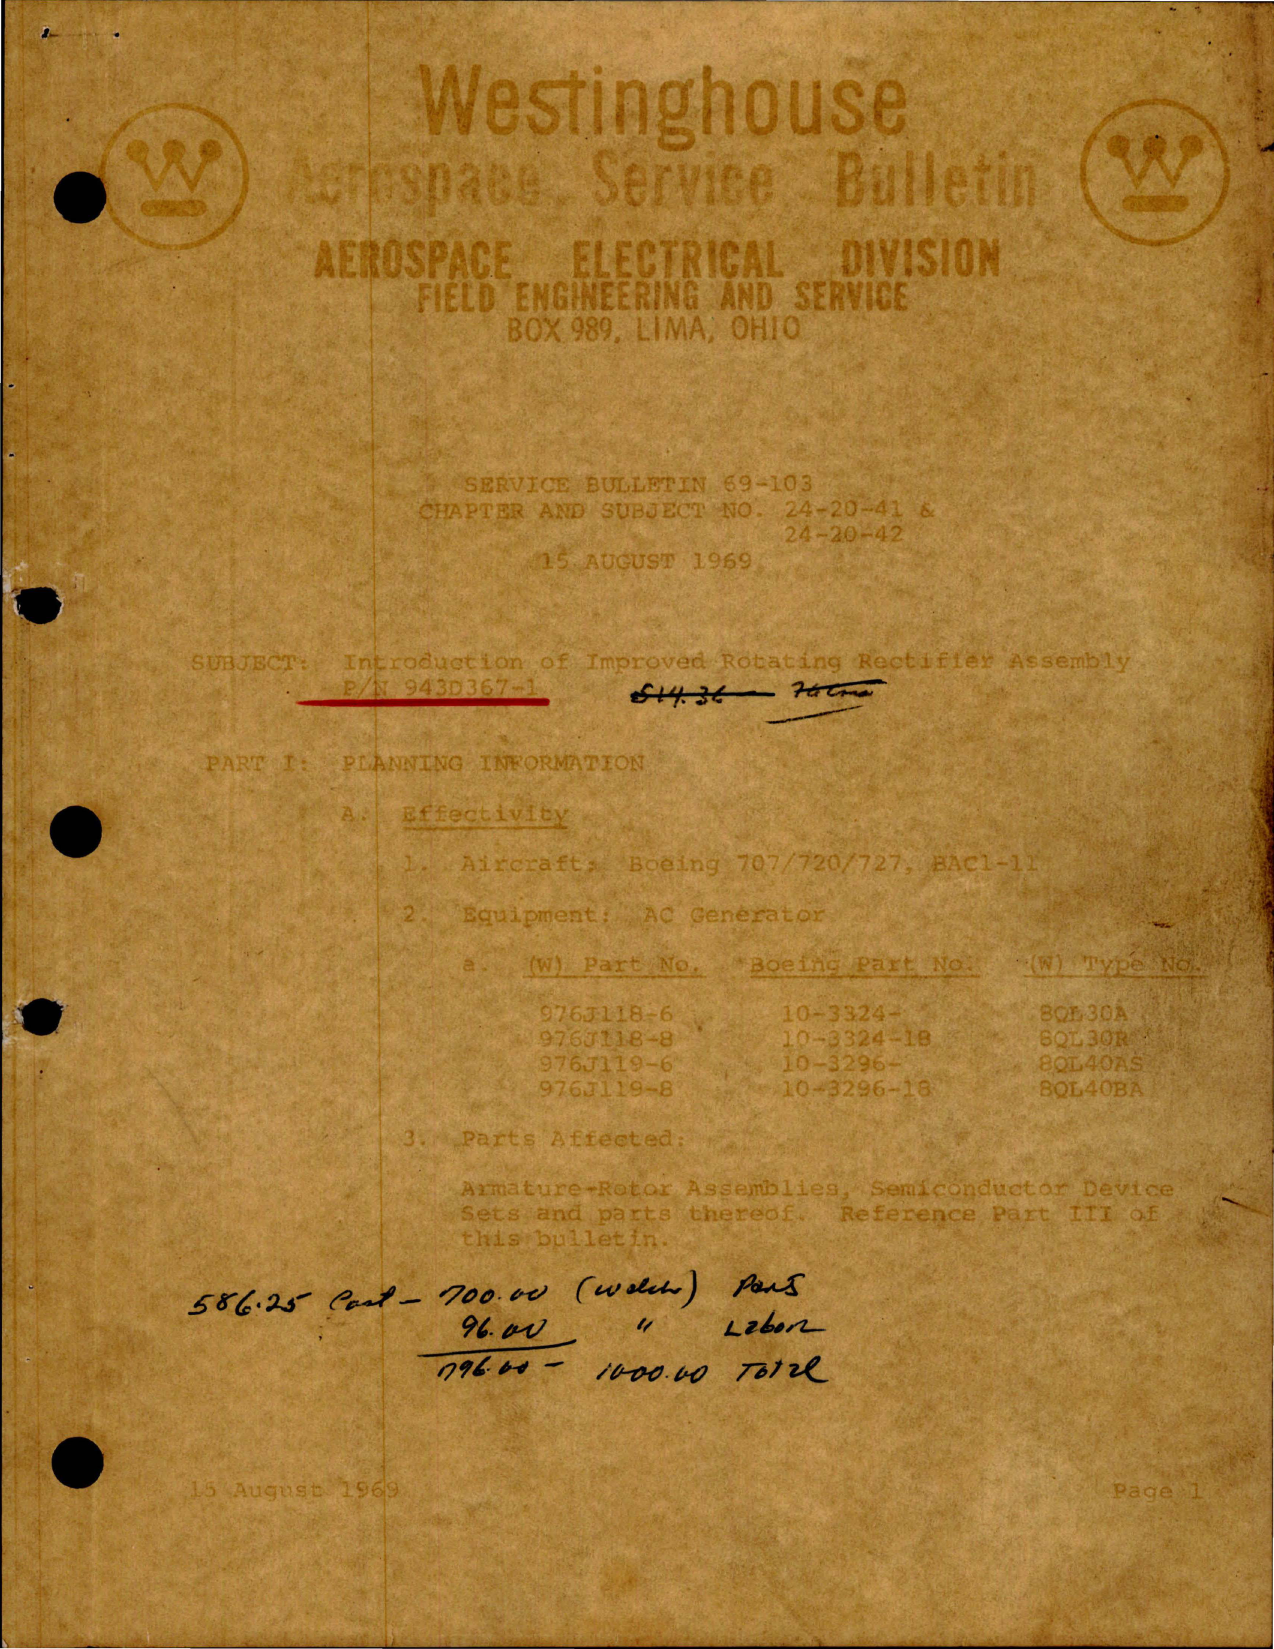 Sample page 1 from AirCorps Library document: Introduction of Improved Rotating Rectifier Assembly - Part 943D367-1 